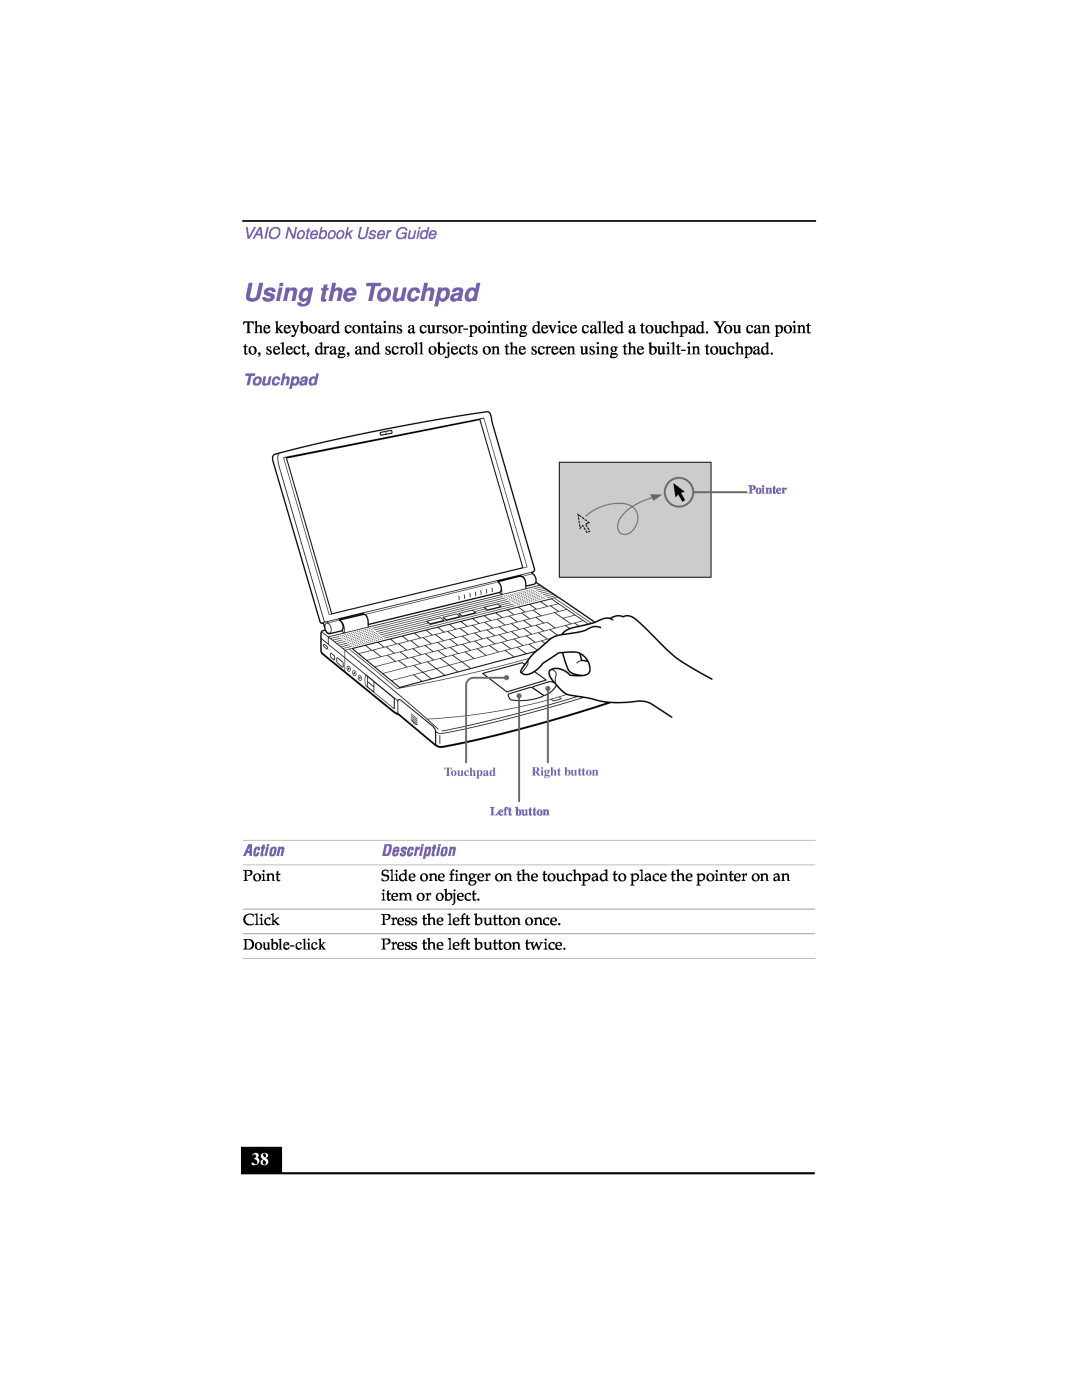 Sony PCG-F640 manual Using the Touchpad, VAIO Notebook User Guide, Point, item or object, Click, Press the left button once 